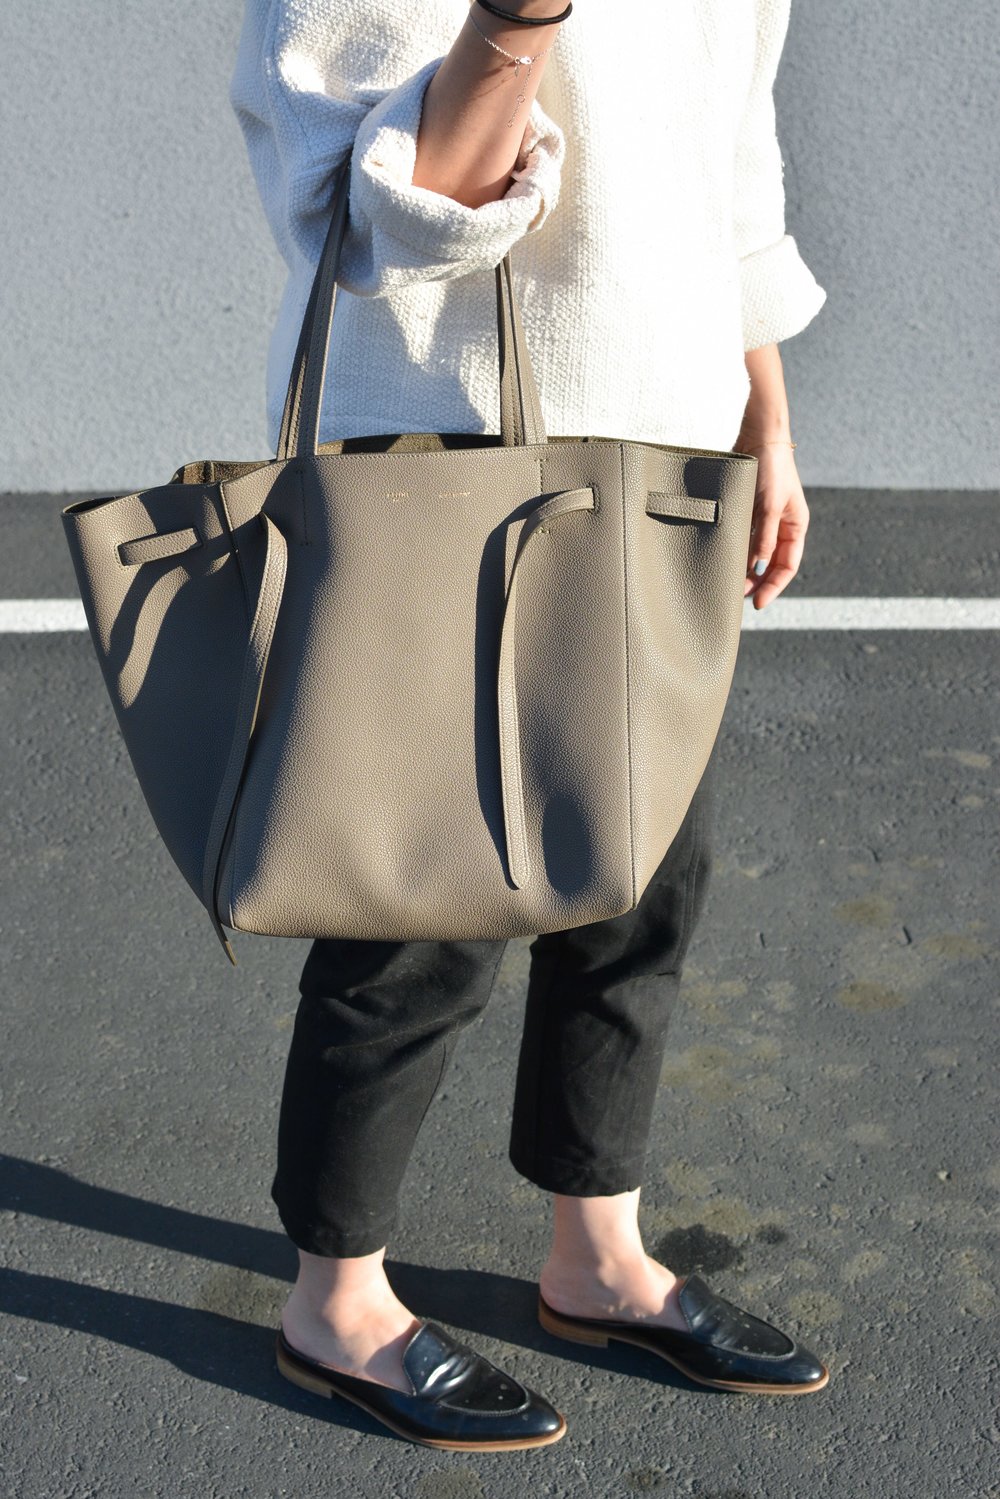 Tale of Two Totes, Part 1: The Celine Small Cabas Phantom Review ...